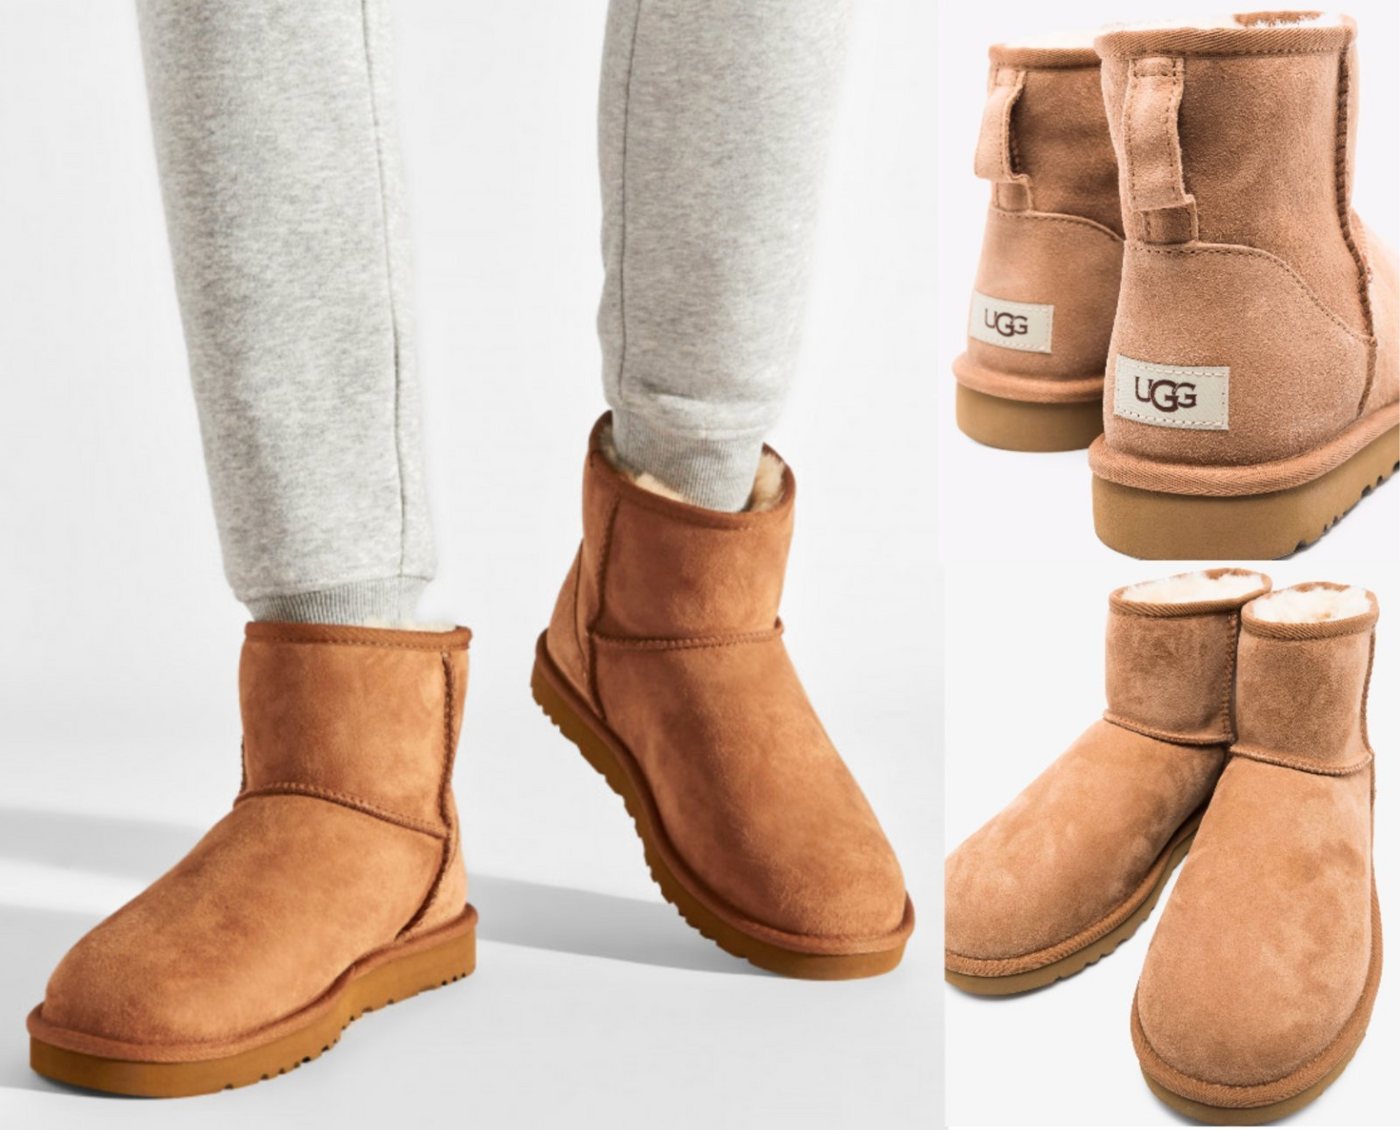 UGG UGG Boots Classic Mini Boot Shearling Chestnut Suede Stiefel Schuhe Sh Sneaker von UGG